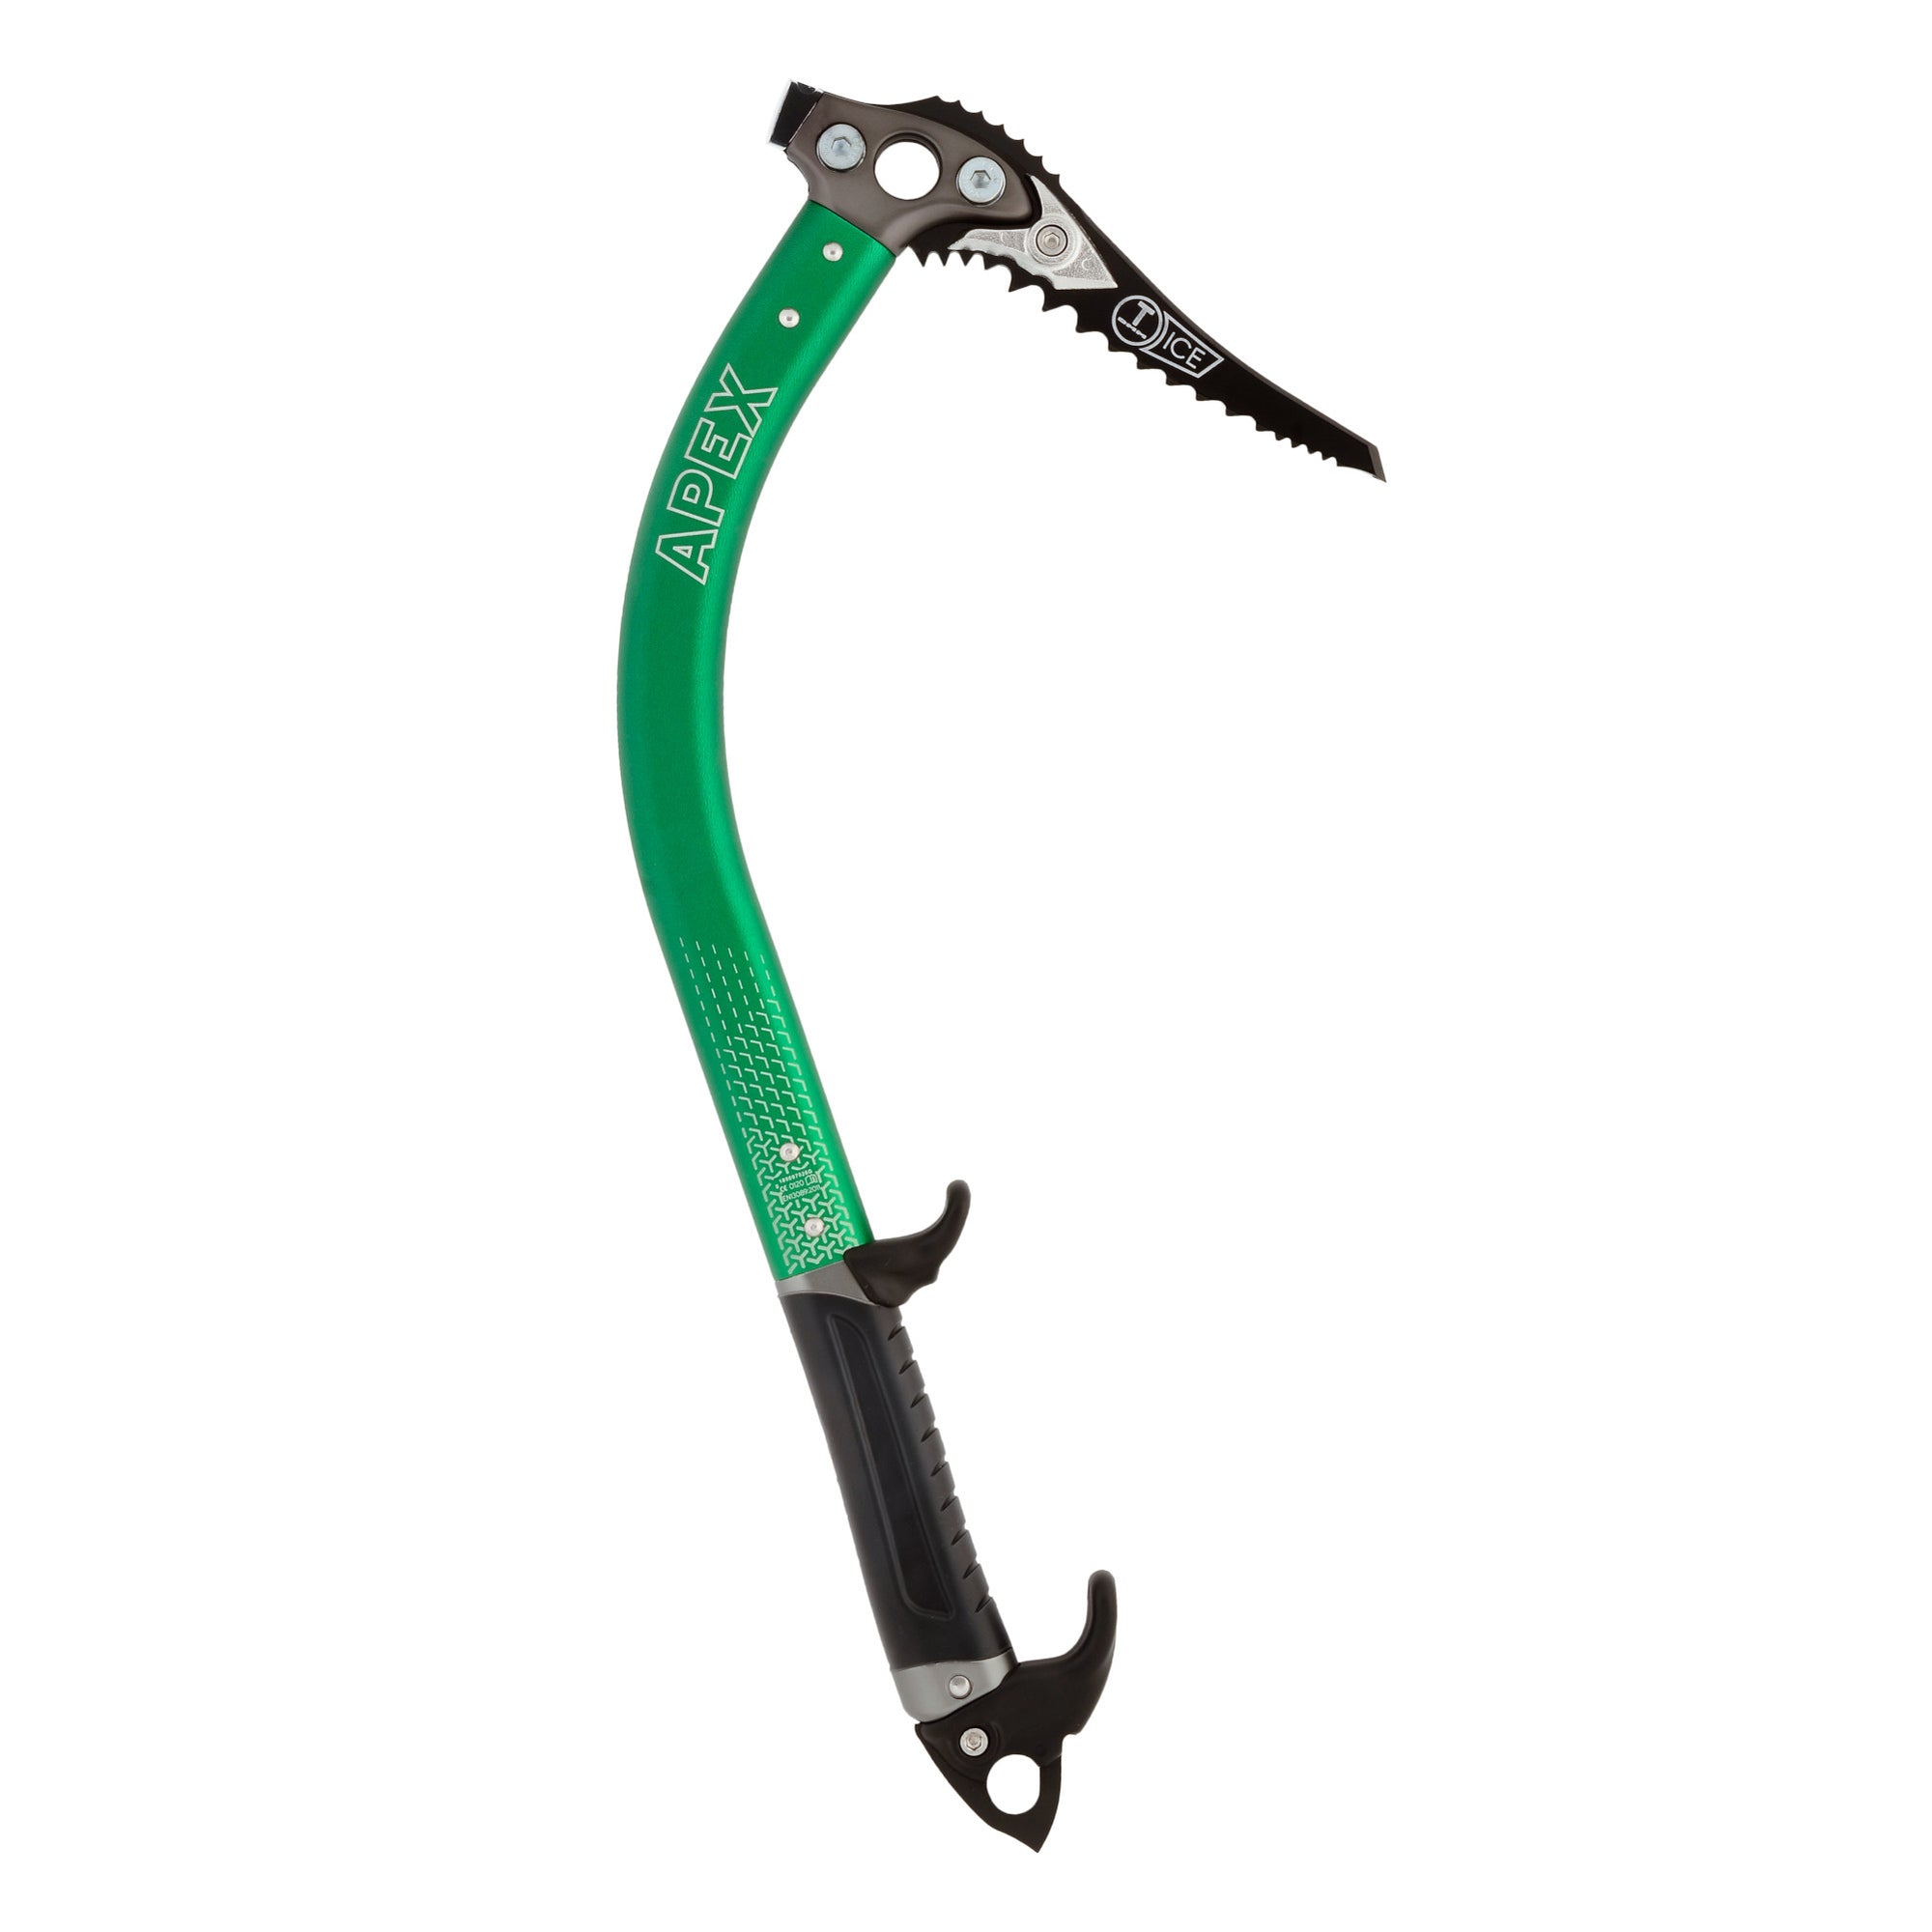 DMM Apex Ice Axe, side view shown in green and black colours